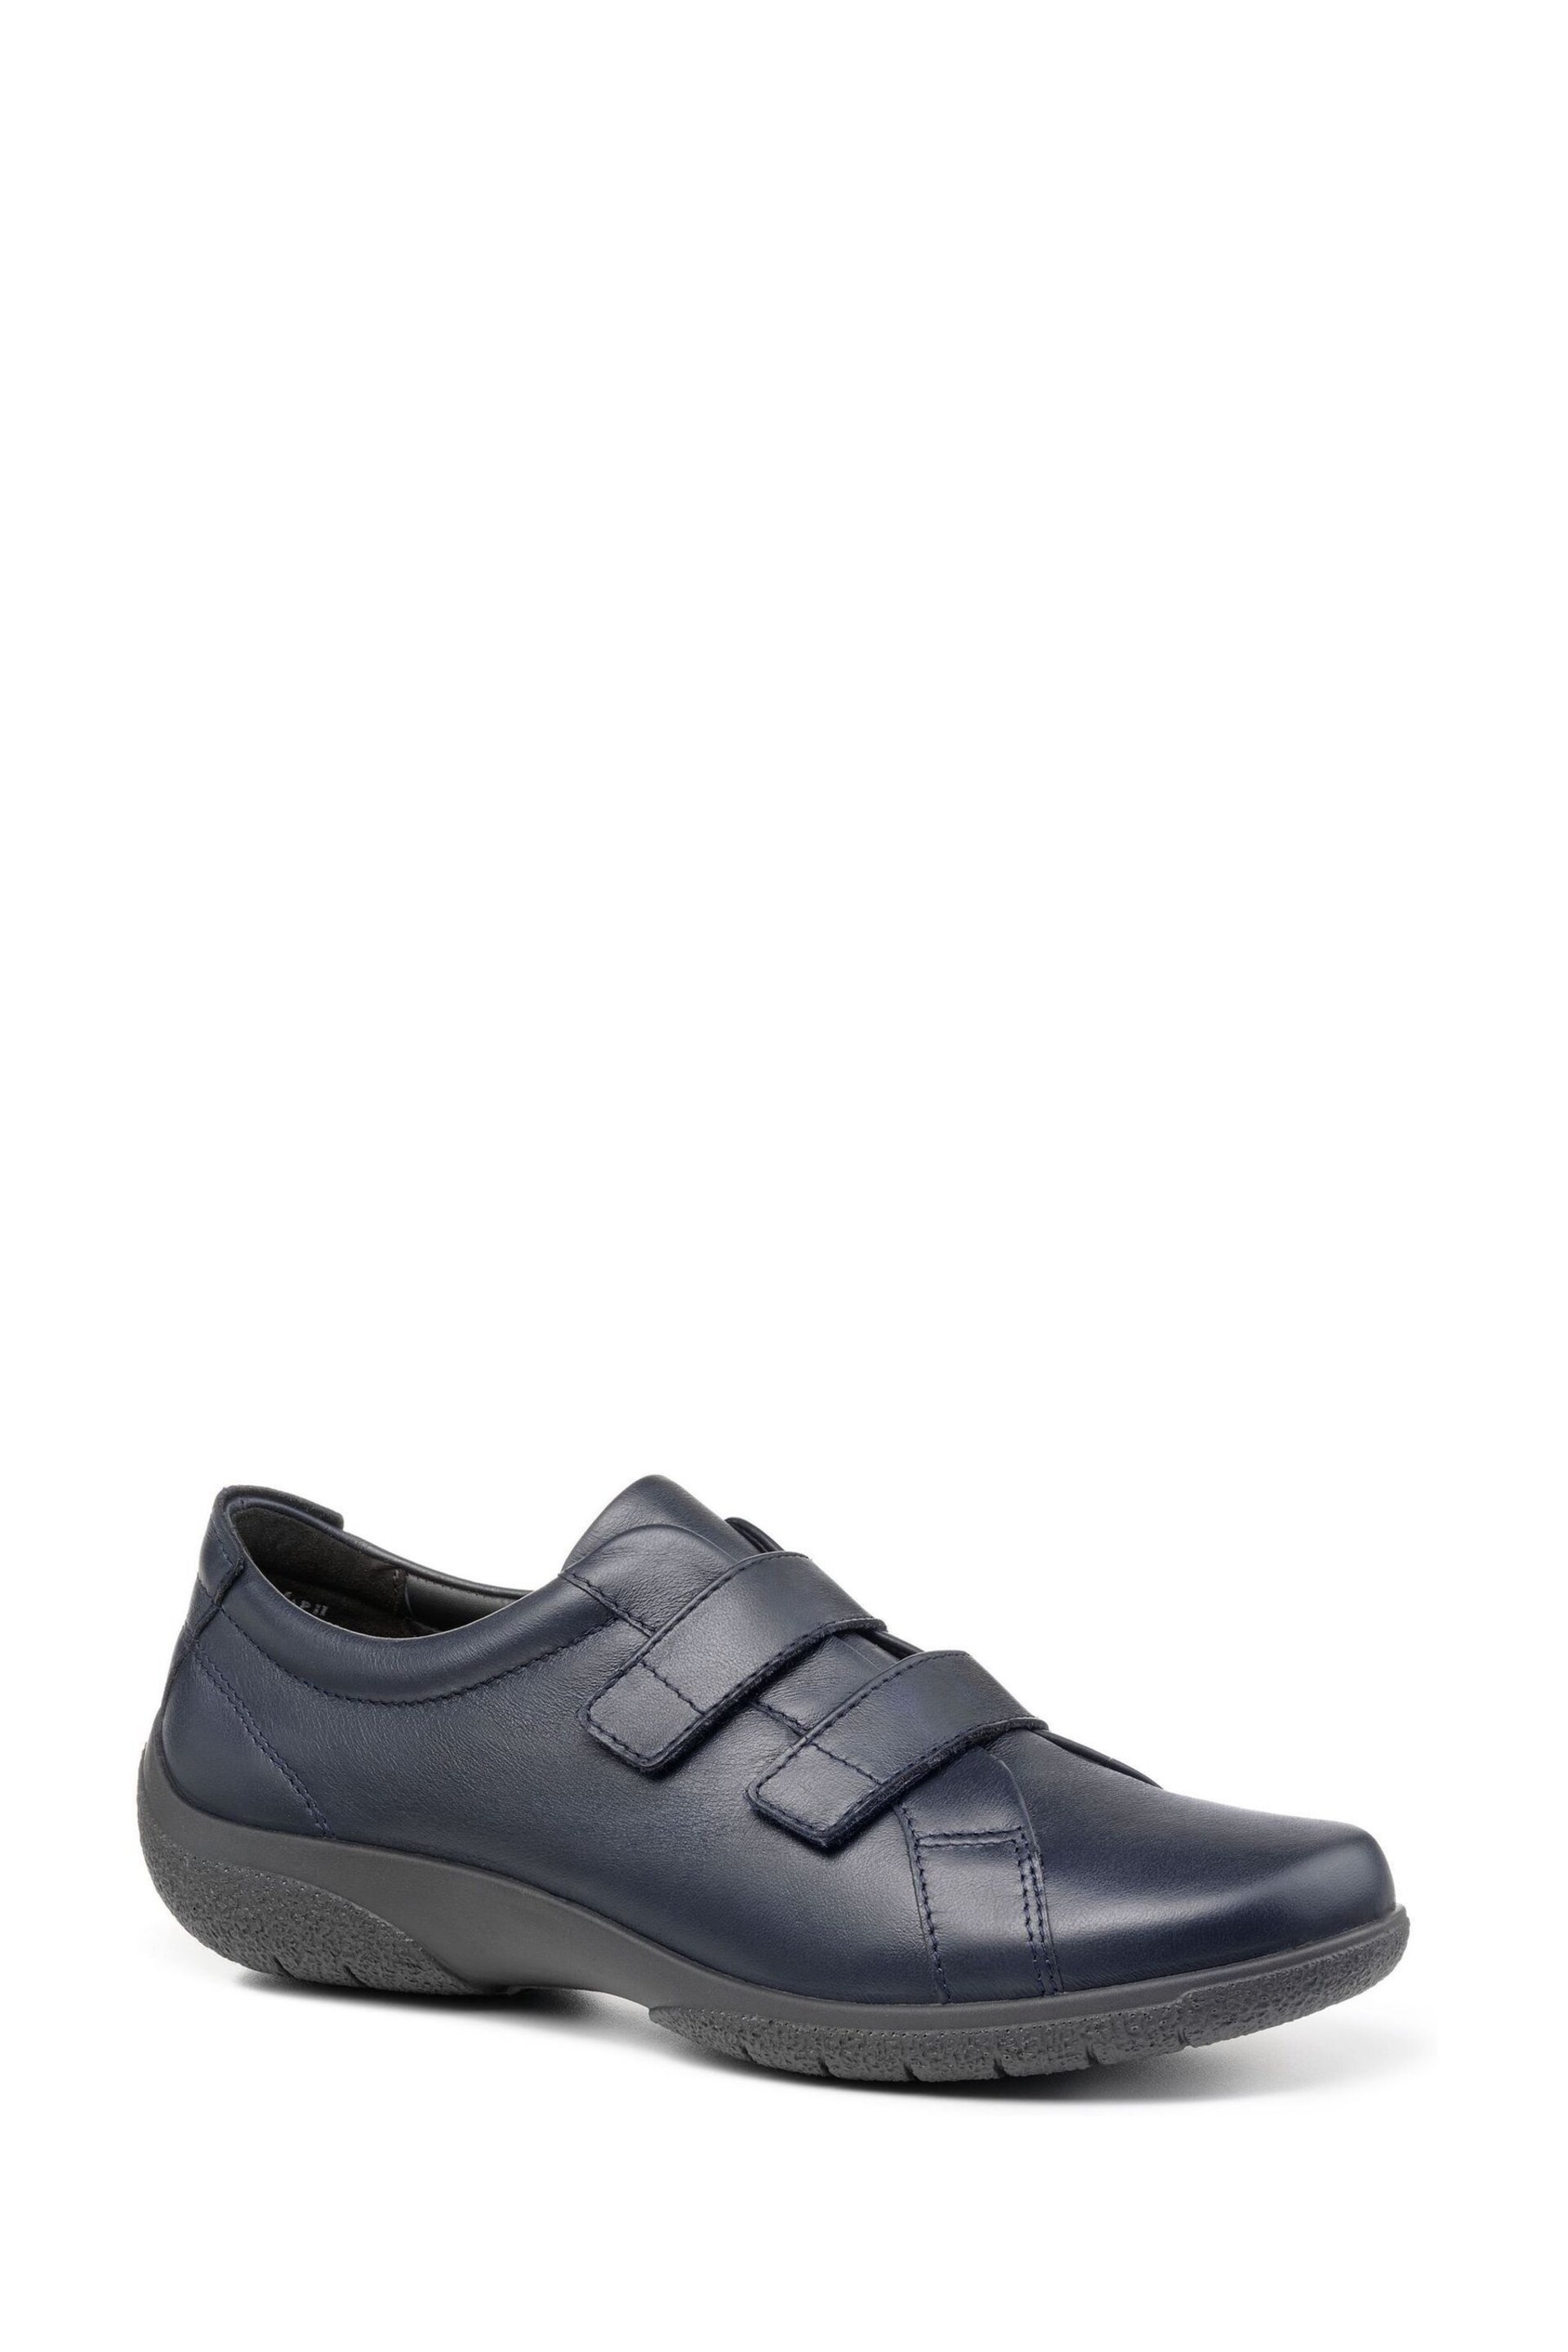 Hotter Leap II Blue Touch-Fastening Shoes - Image 2 of 4